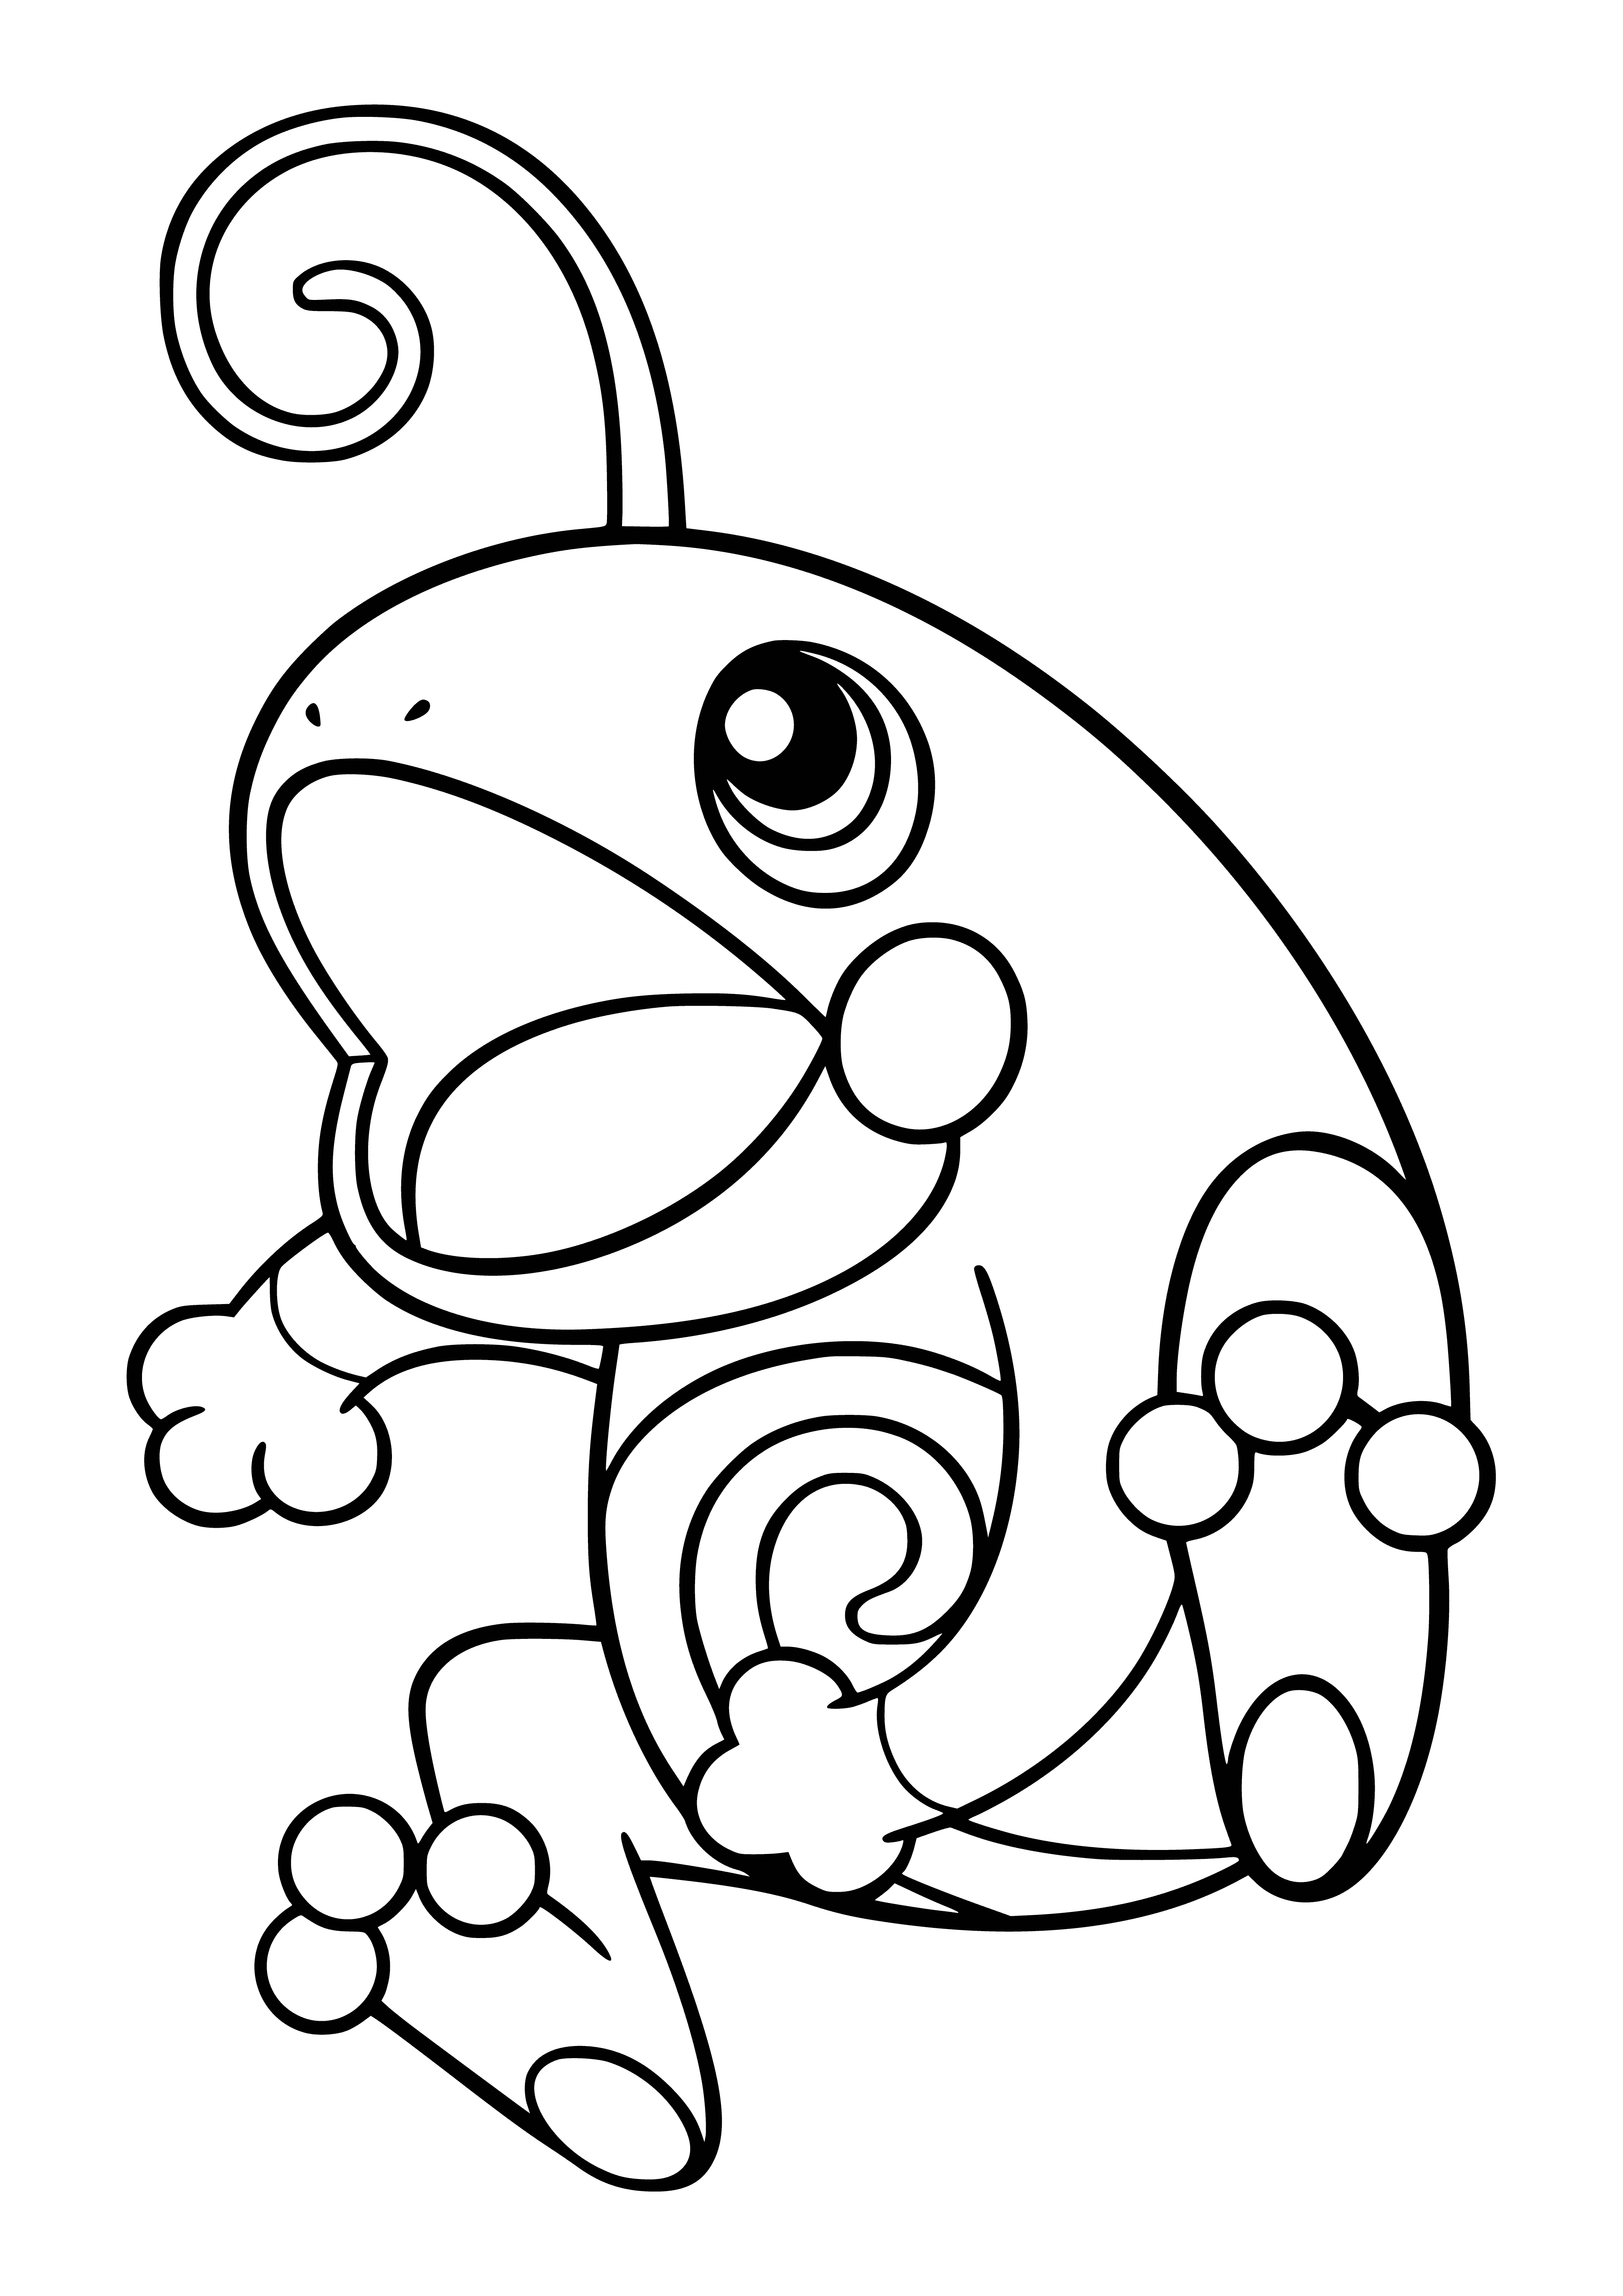 coloring page: Pokemon Politoed is a large green frog w/ yellow spots & red eyes. Evolves from Poliwhirl & is a water type. Has big mouth & big feet.